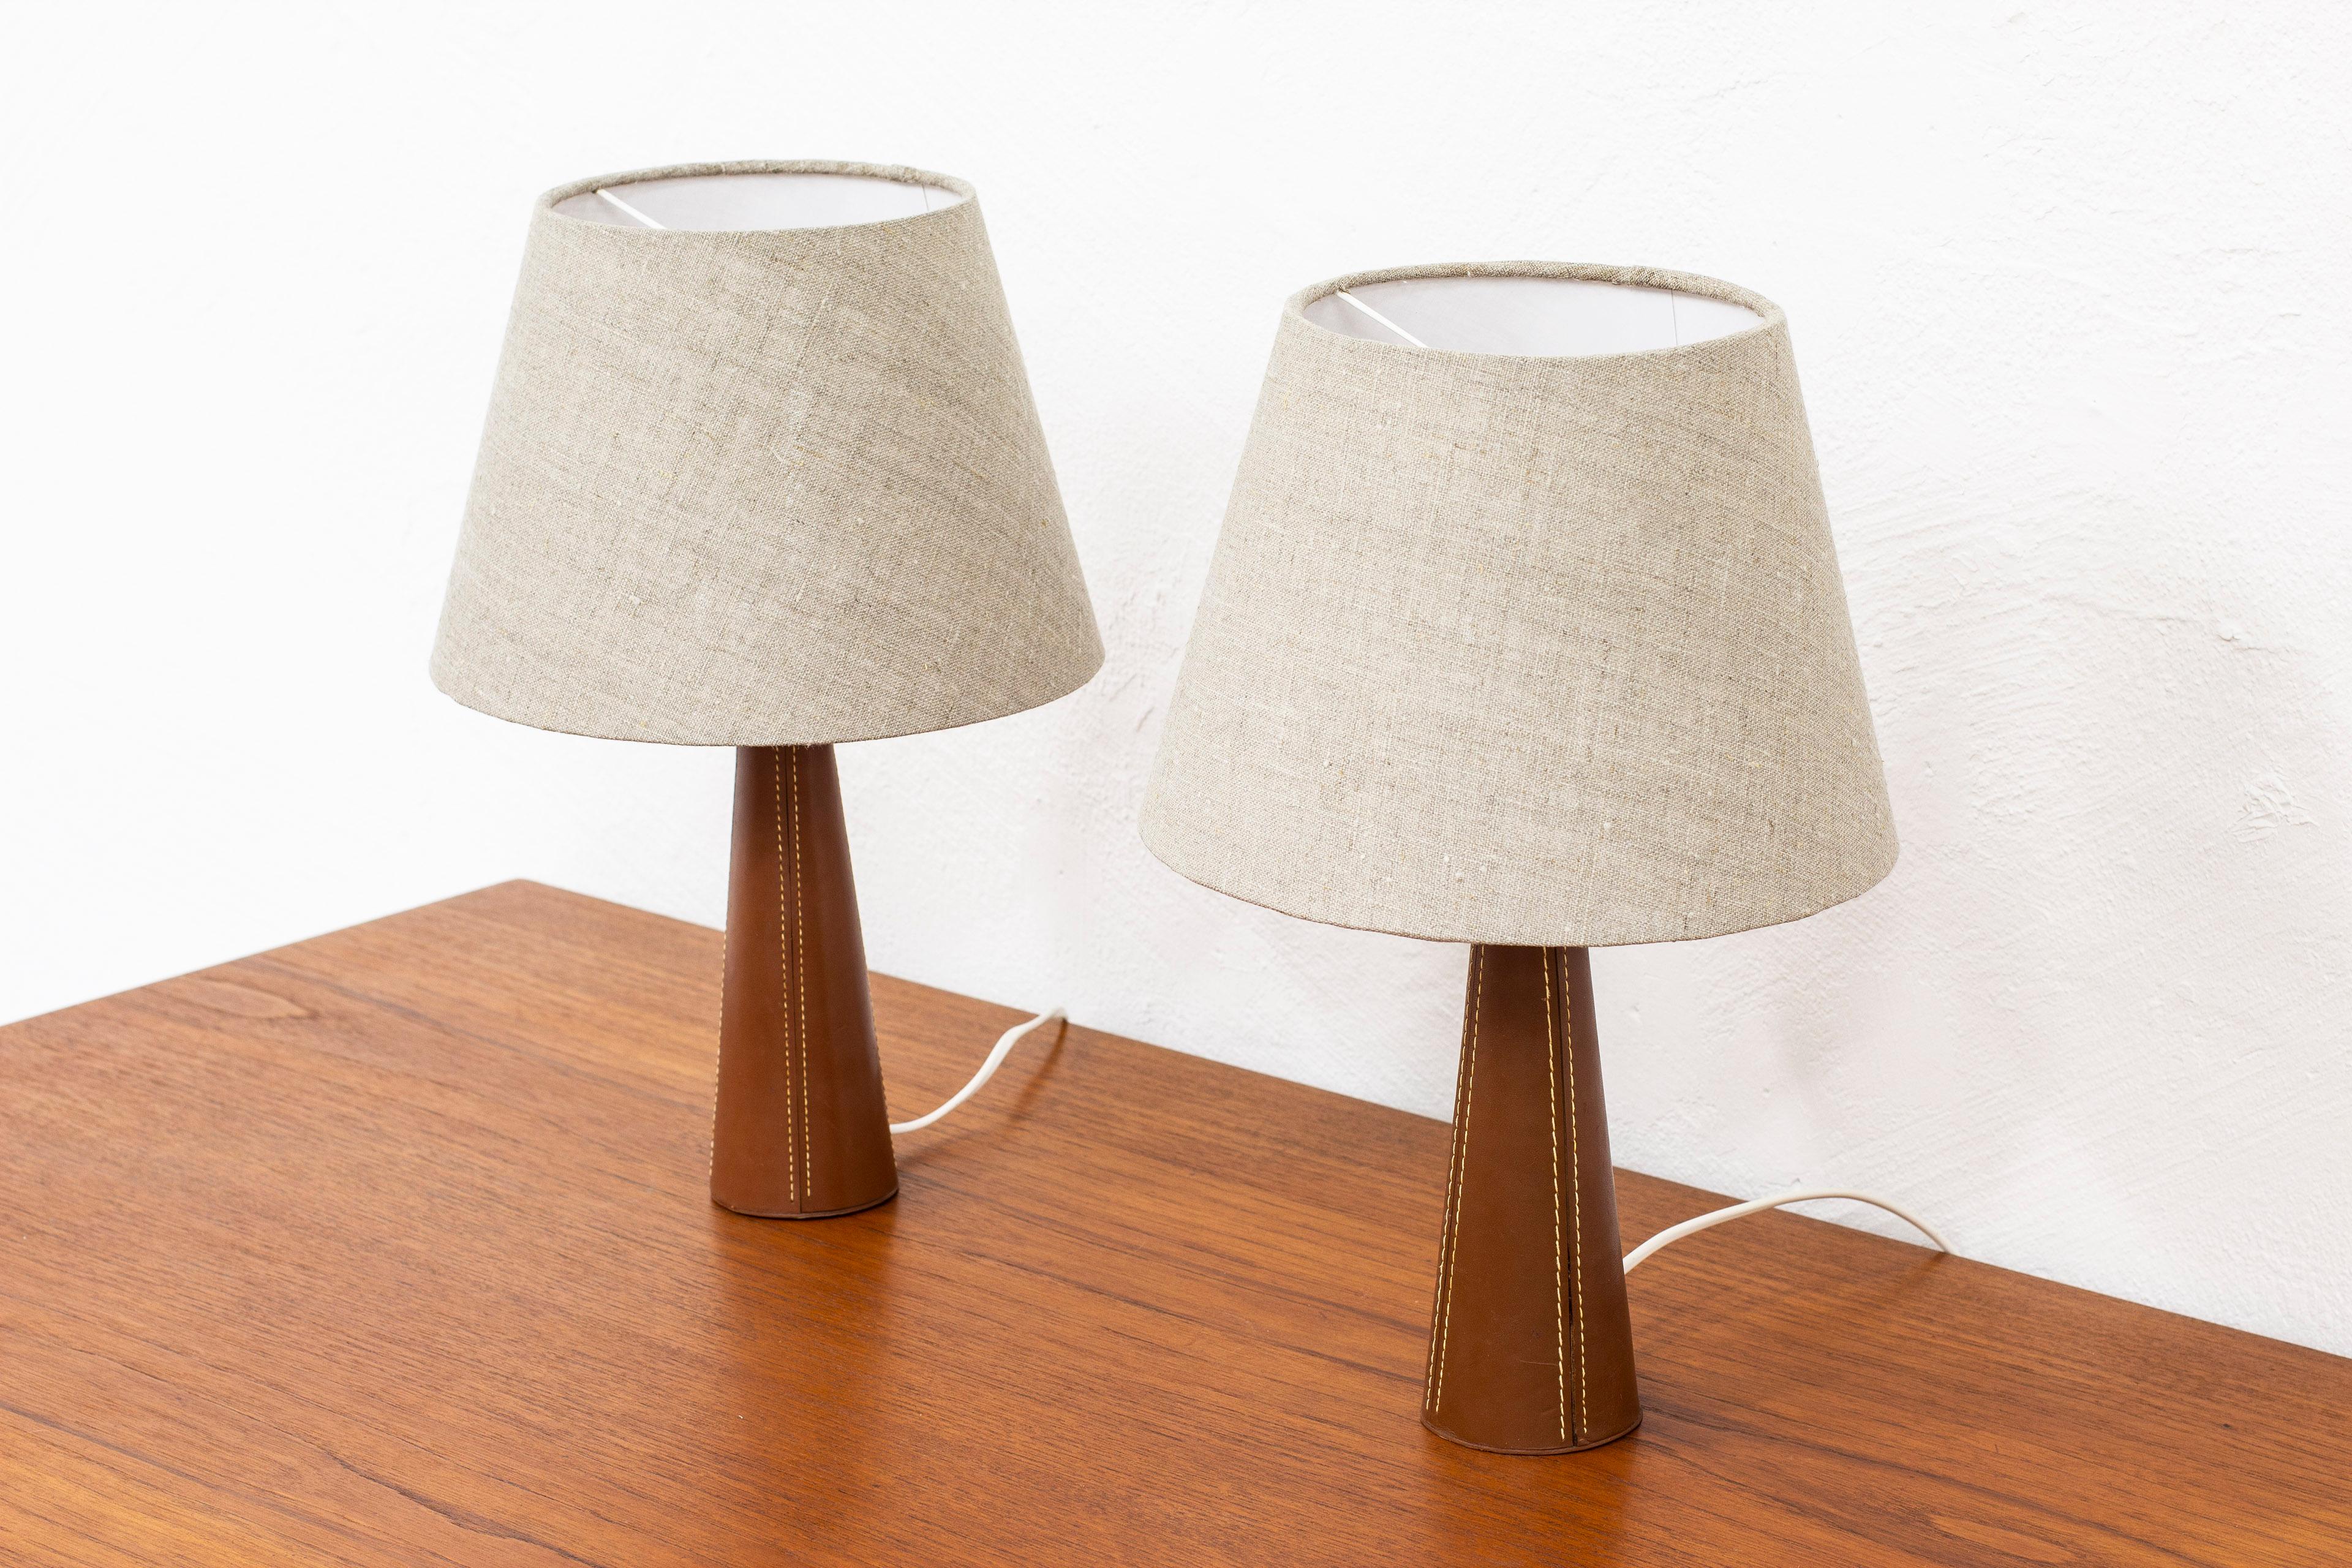 European Pair of Leather Table Lamps in the Style of Lisa Johansson Pape, Scandinavian